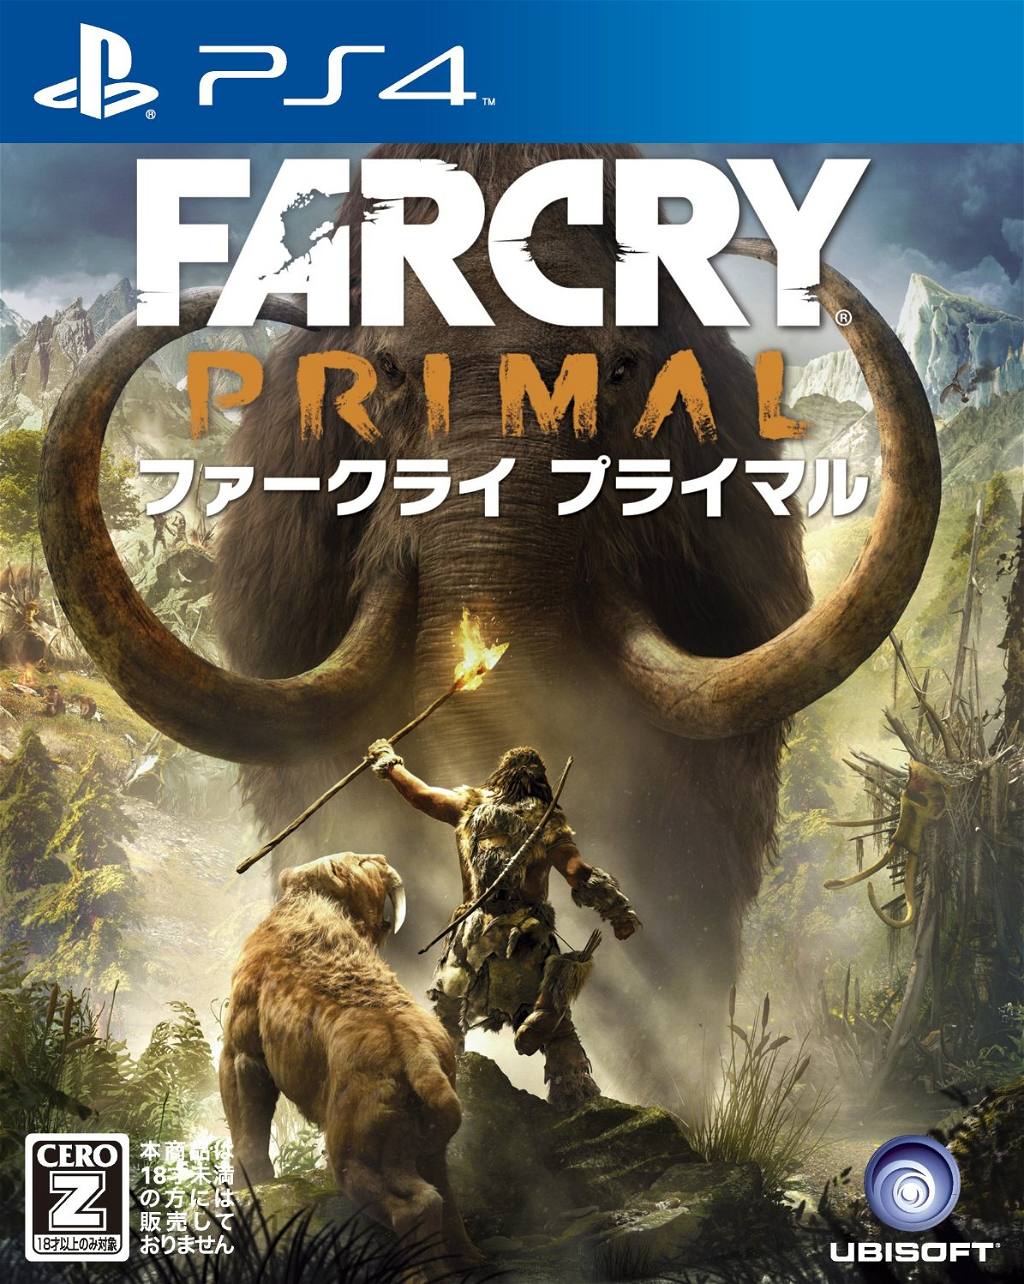 Far Cry 4 / Far Cry Primal Double Pack for PlayStation 4